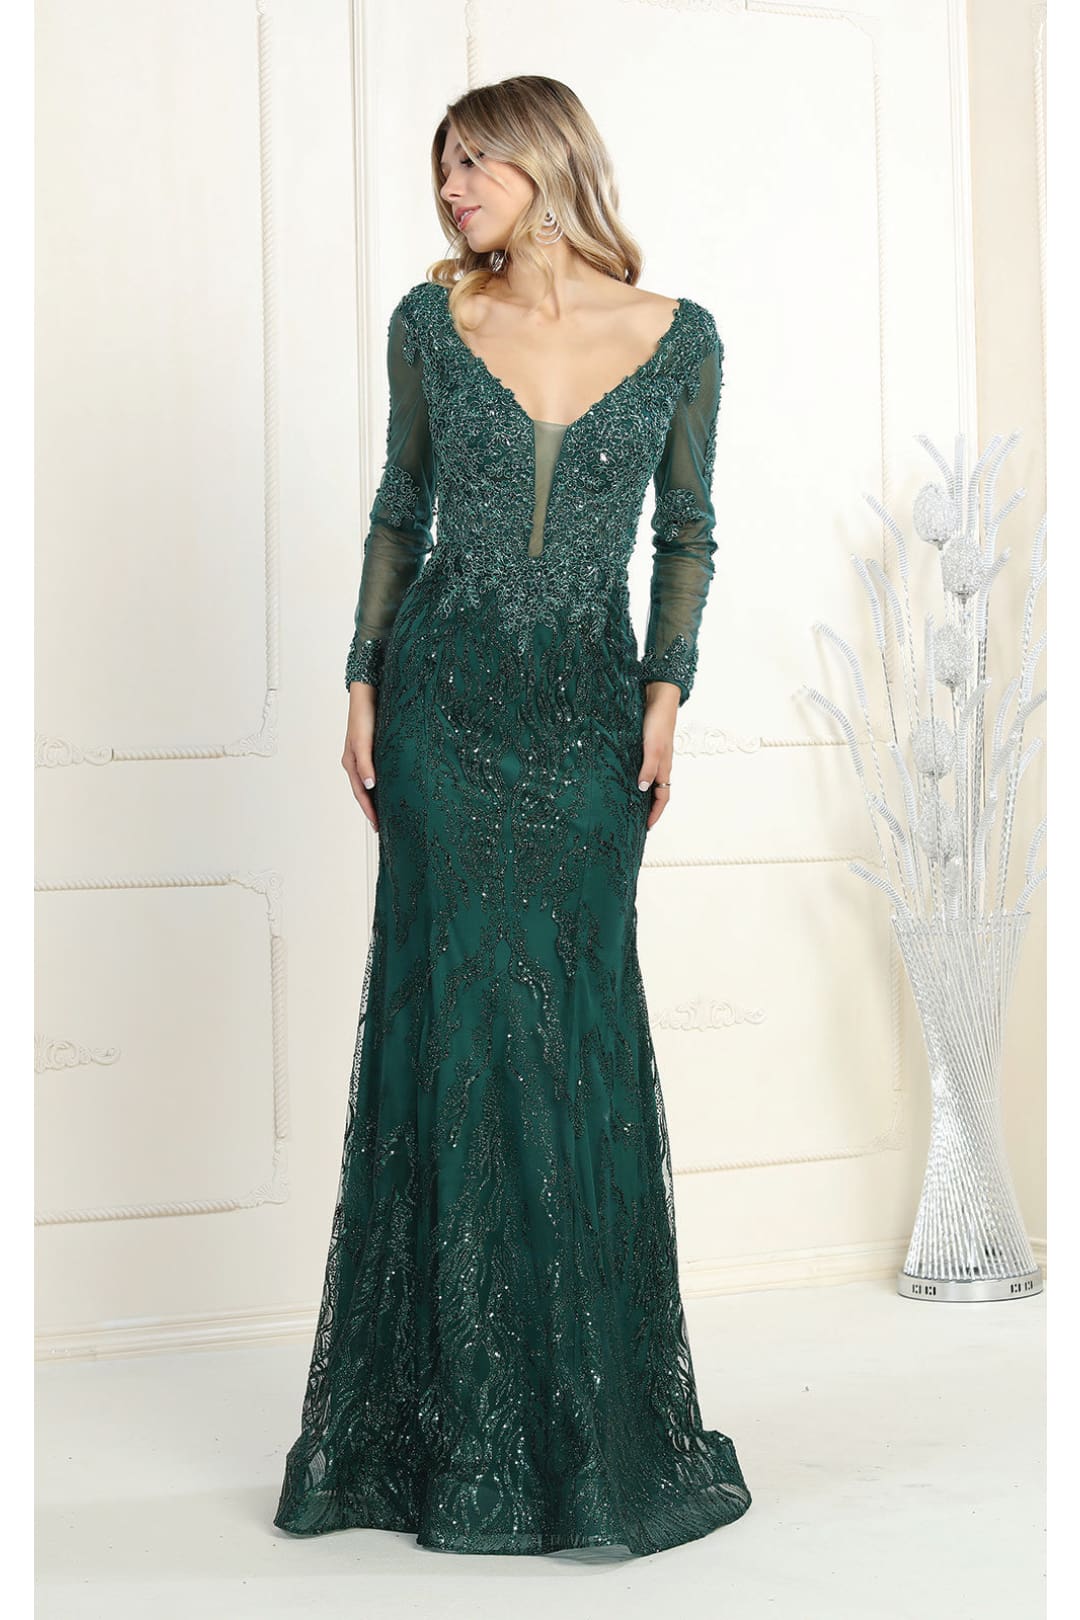 Royal Queen RQ7937 Long Sleeve Plus Size Mother Of The Bride Dress - HUNTER GREEN / L - Dress